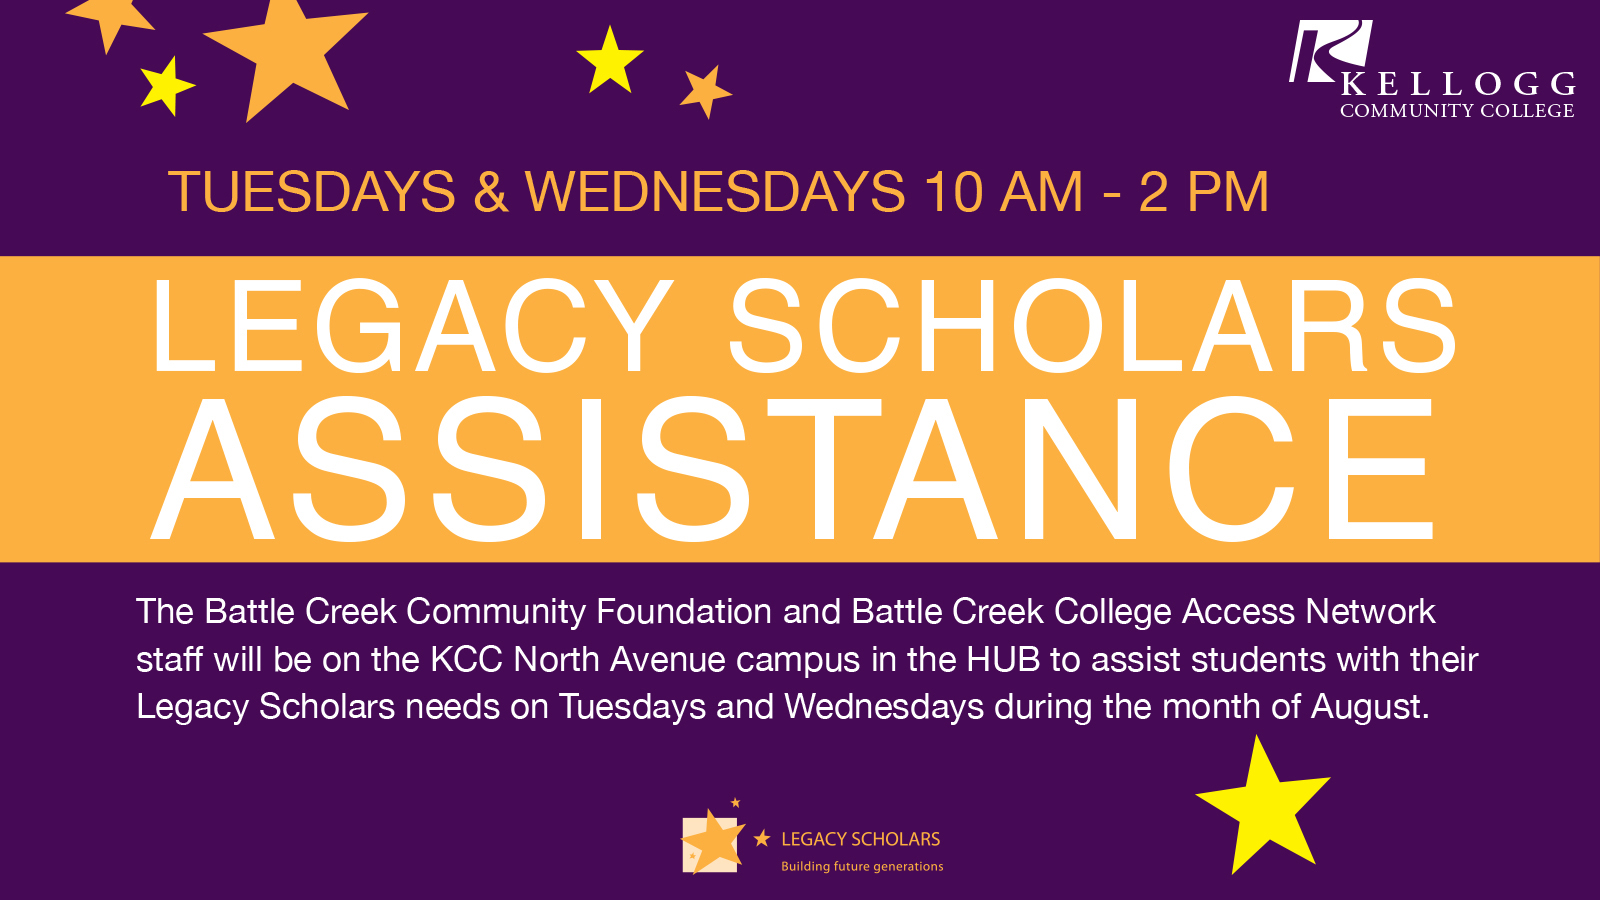 A text slide with information about upcoming Legacy Scholars Assistance days, to be held on campus in Battle Creek from 10 a.m. to 2 p.m. every Tuesday and Wednesday in August 2017.